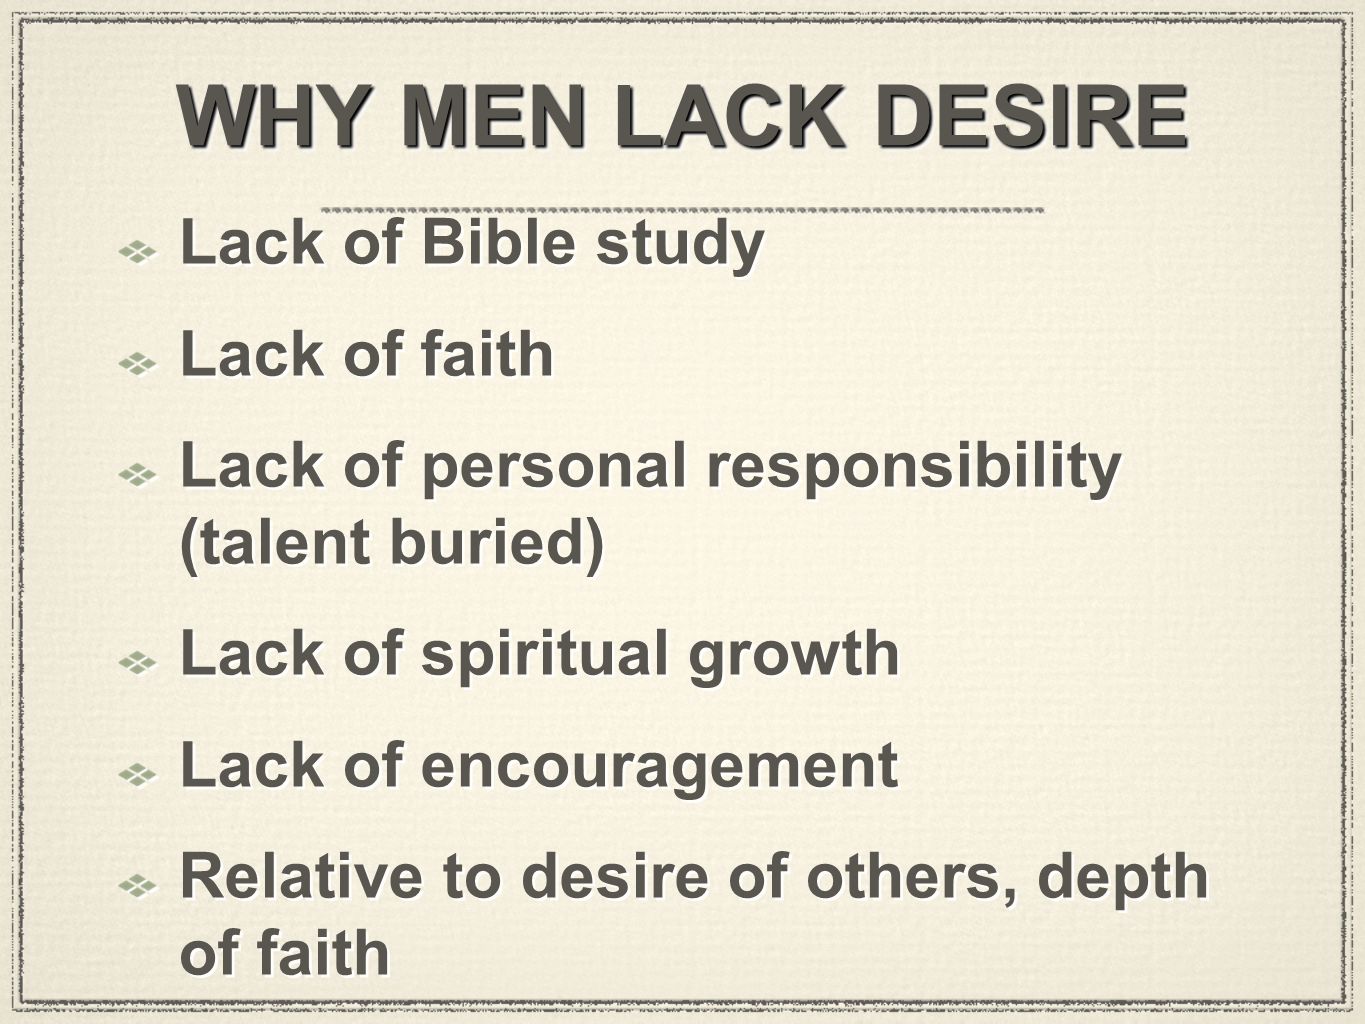 WHY MEN LACK DESIRE Lack of Bible study Lack of faith Lack of personal responsibility (talent buried) Lack of spiritual growth Lack of encouragement Relative to desire of others, depth of faith Lack of Bible study Lack of faith Lack of personal responsibility (talent buried) Lack of spiritual growth Lack of encouragement Relative to desire of others, depth of faith